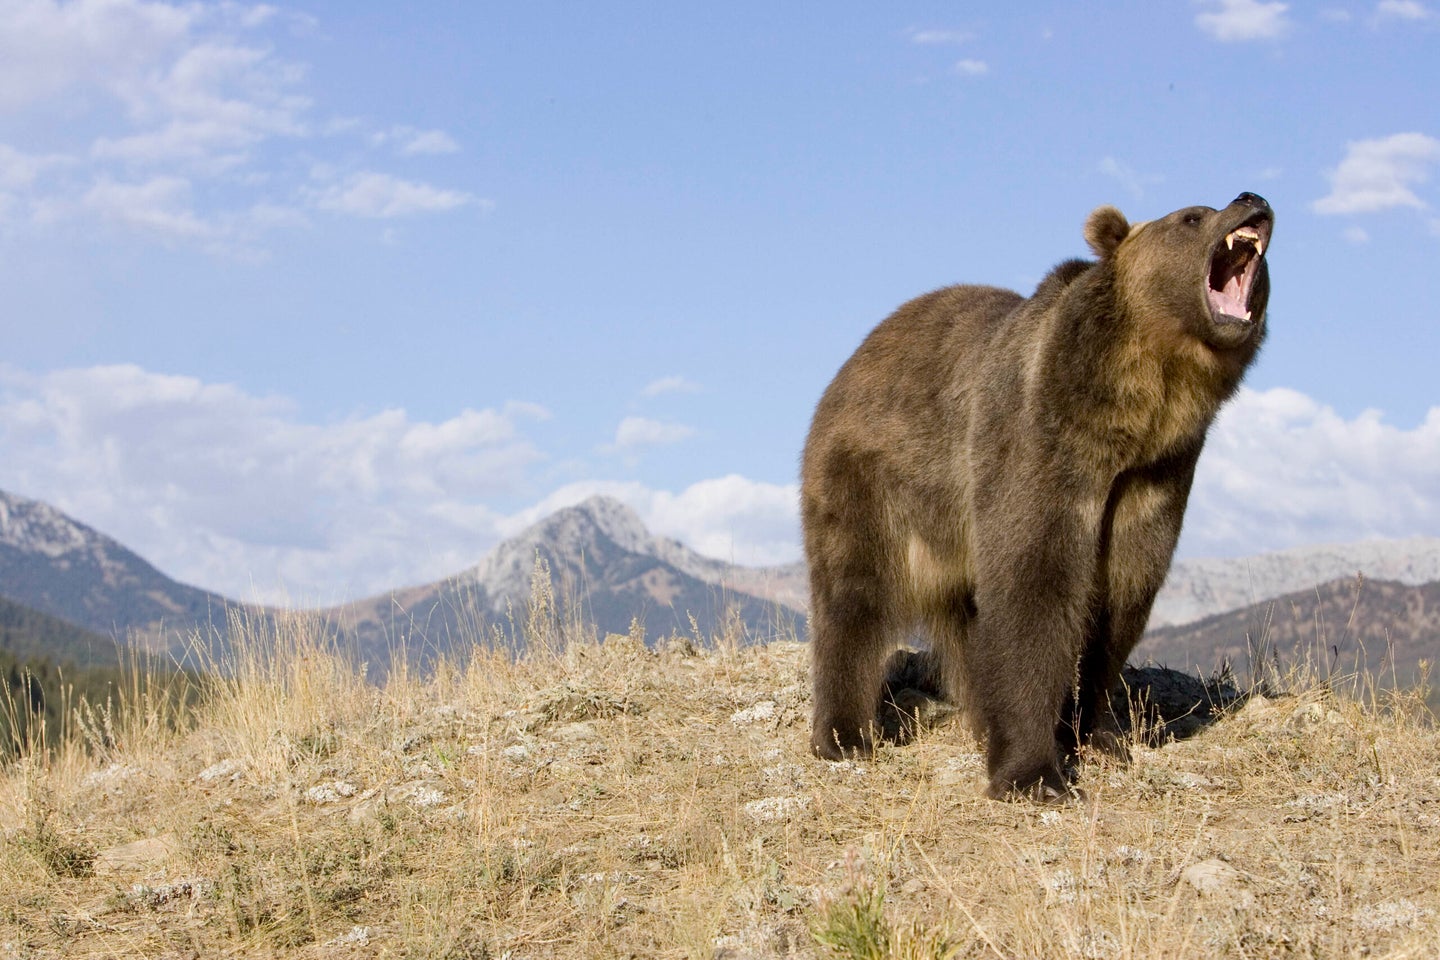 Grizzlies can weigh up to 800 pounds.